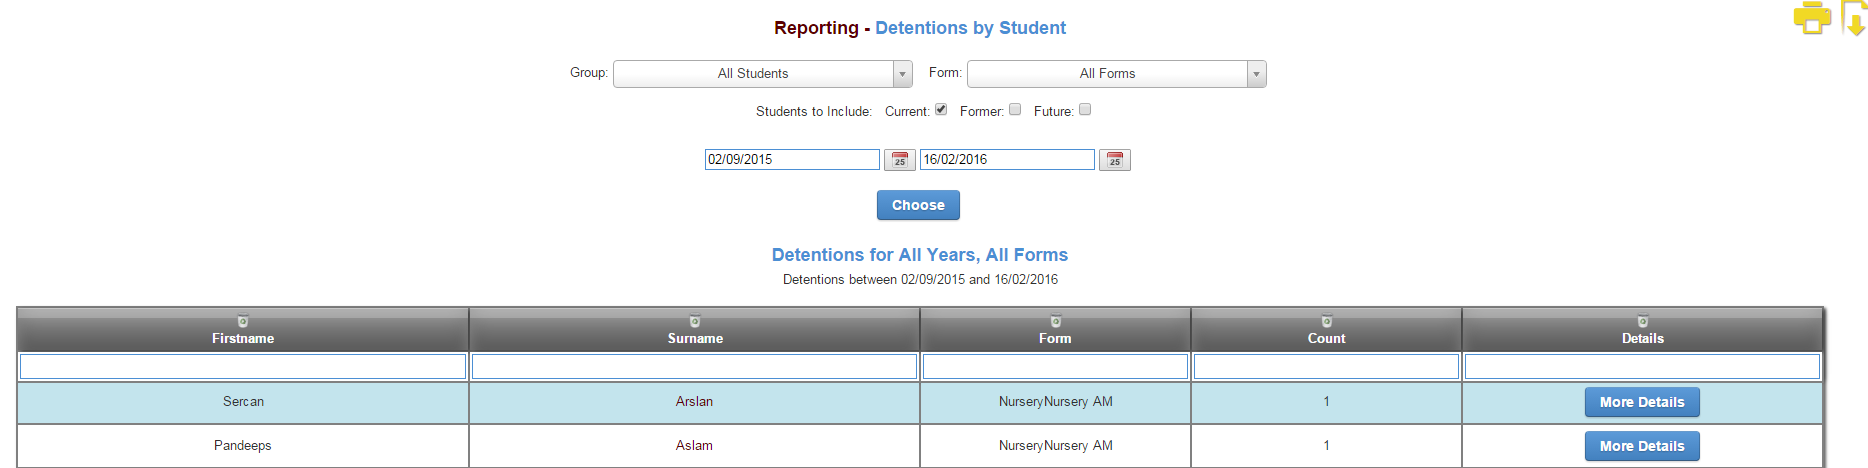 detentions by student.png